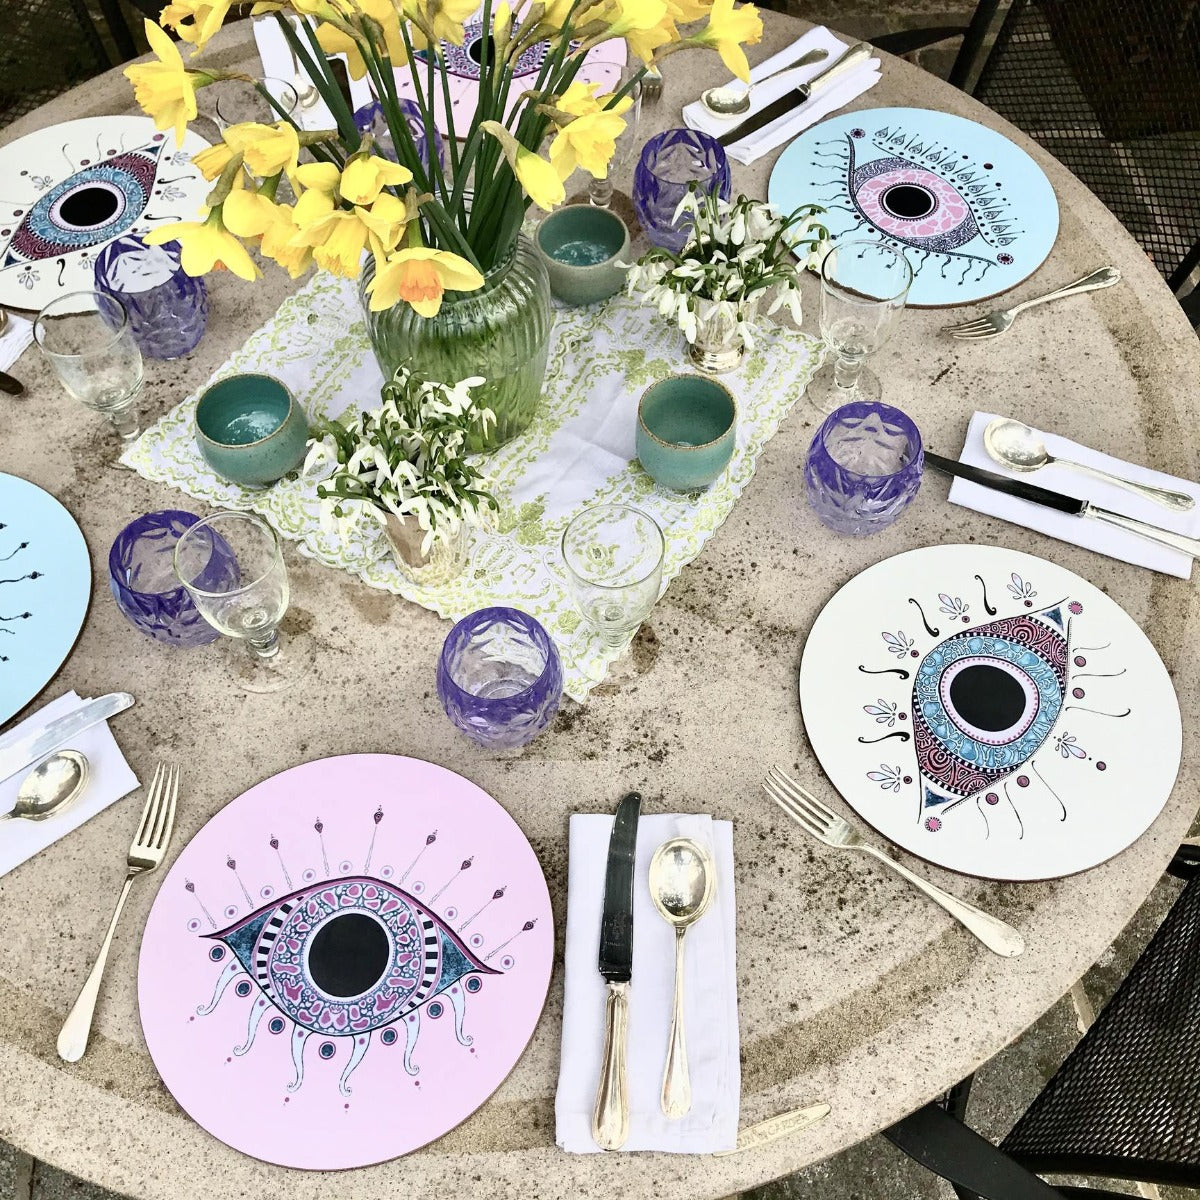 Set of 6 Mixed 'Evil Eye' Pastel Placemats